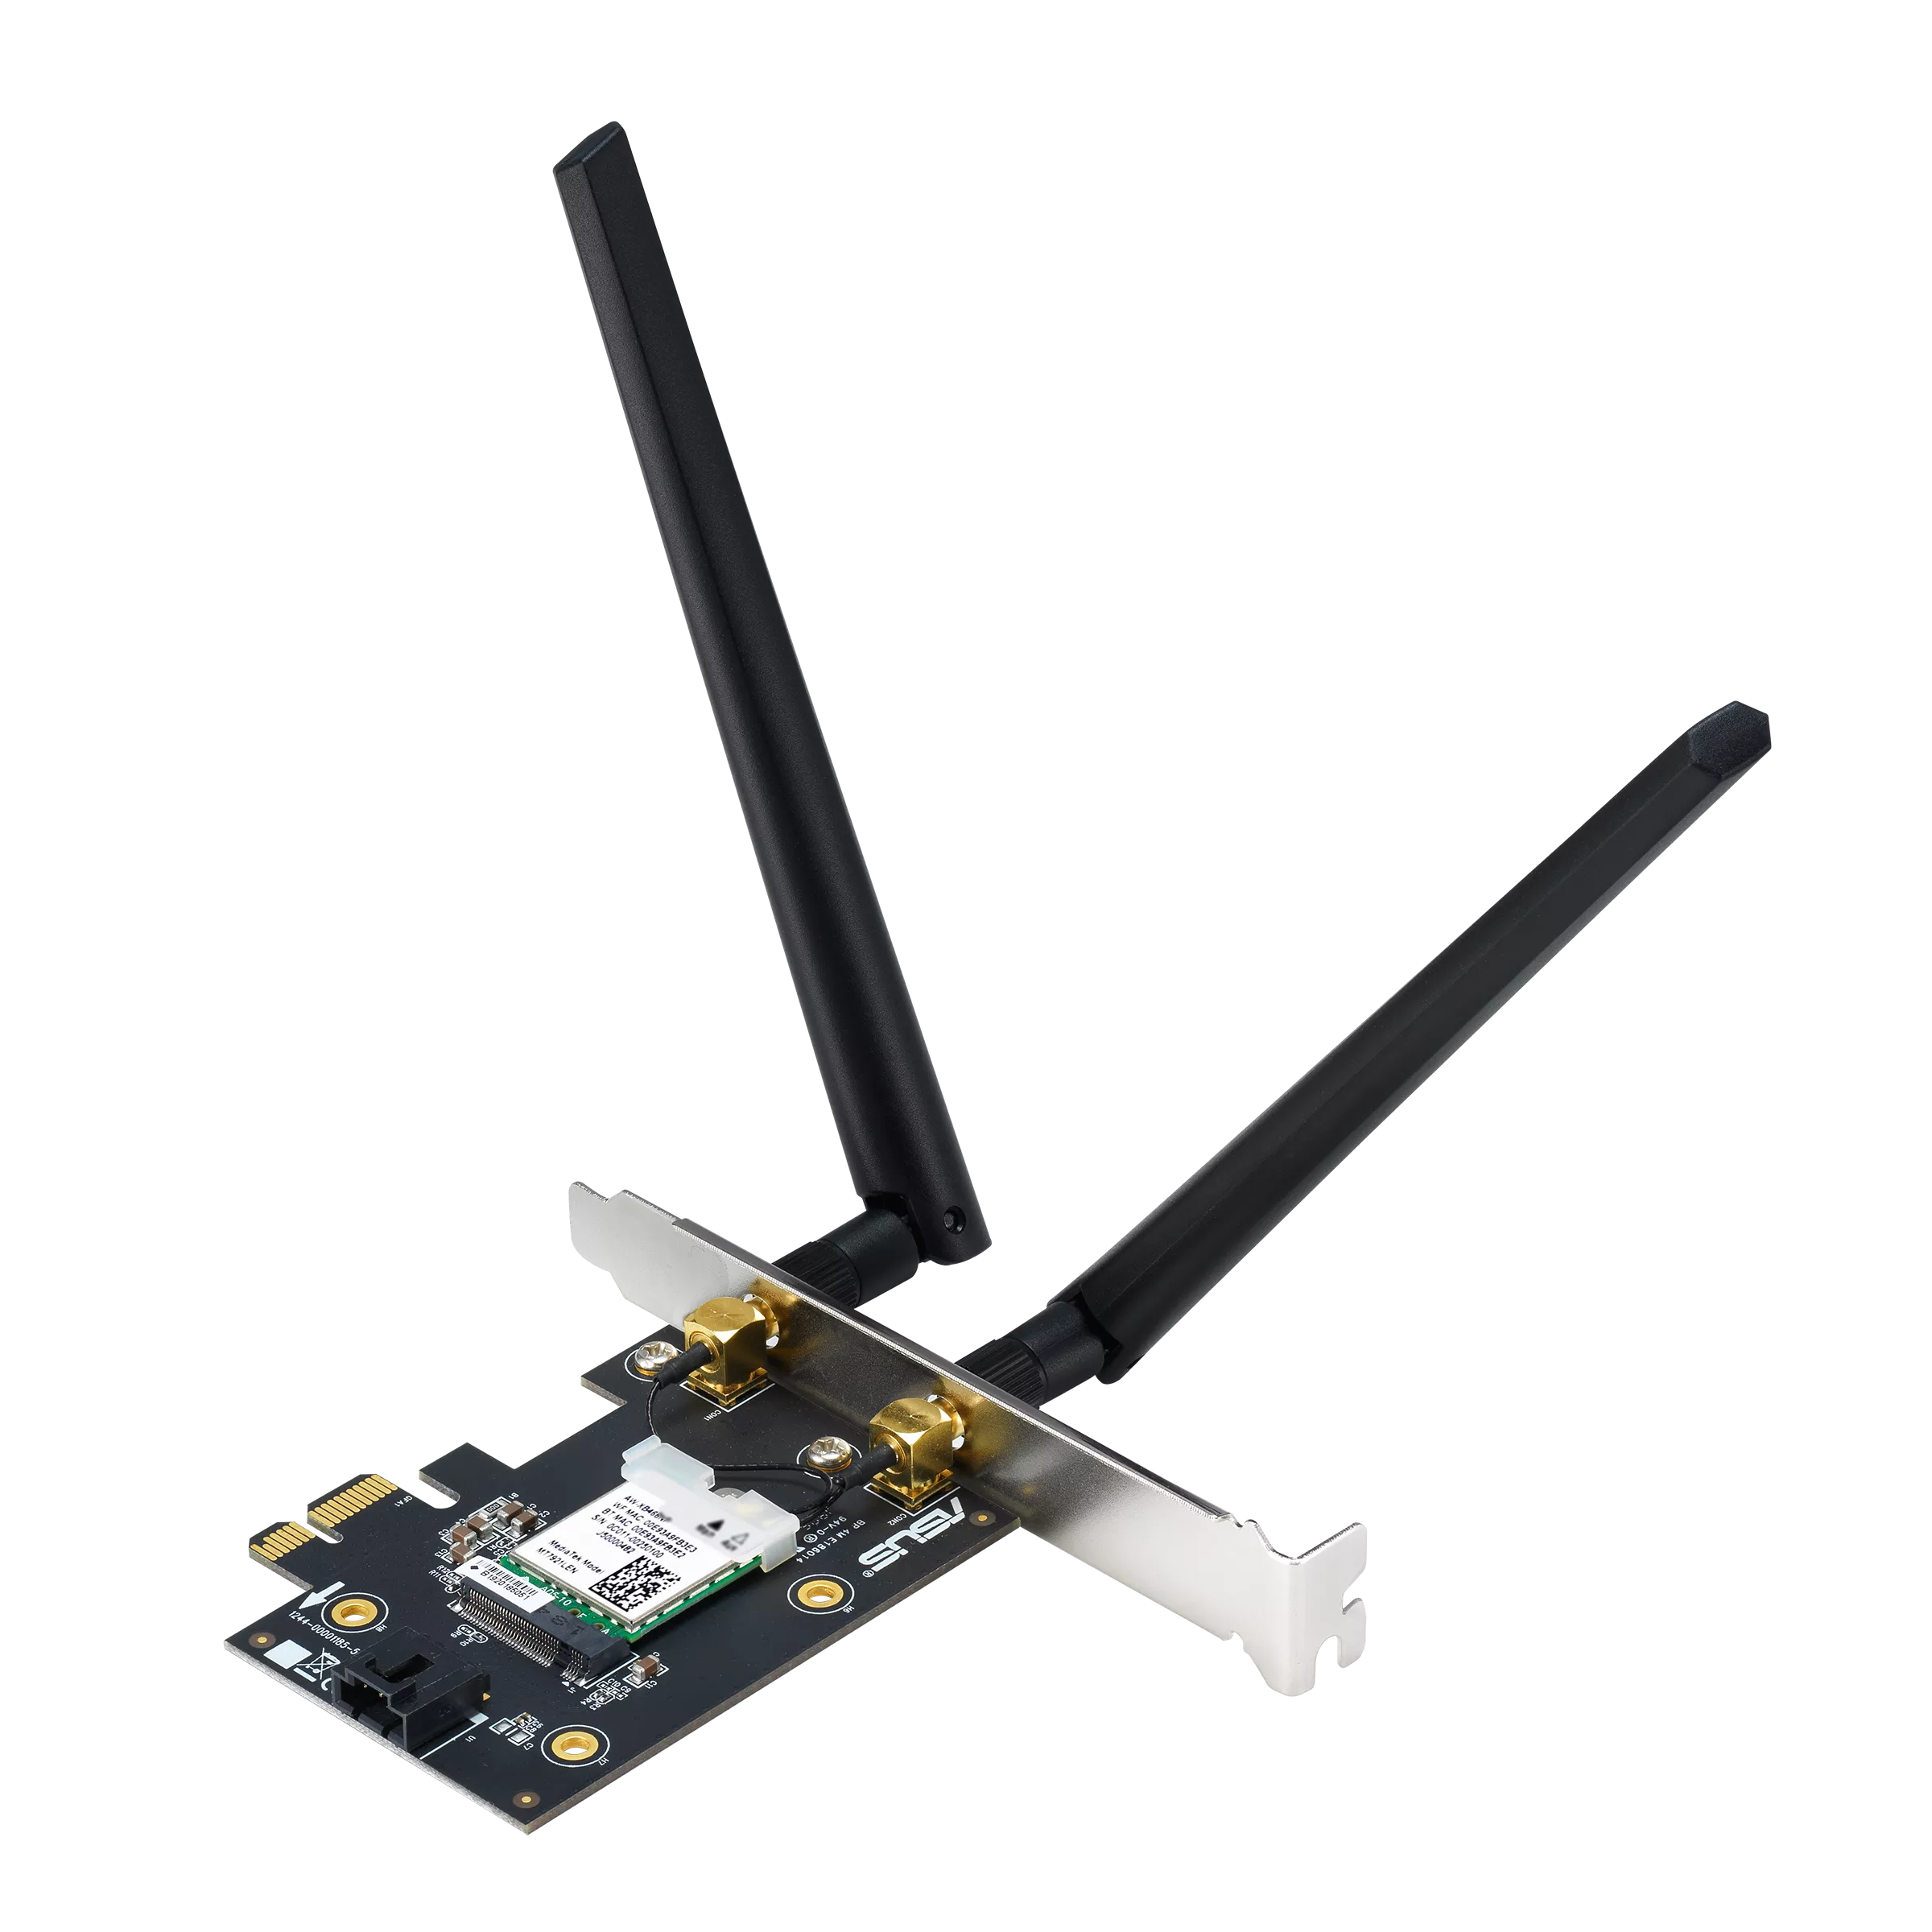   Wi-Fi Asus PCE-AXE5400 (90IG07I0-ME0B10)